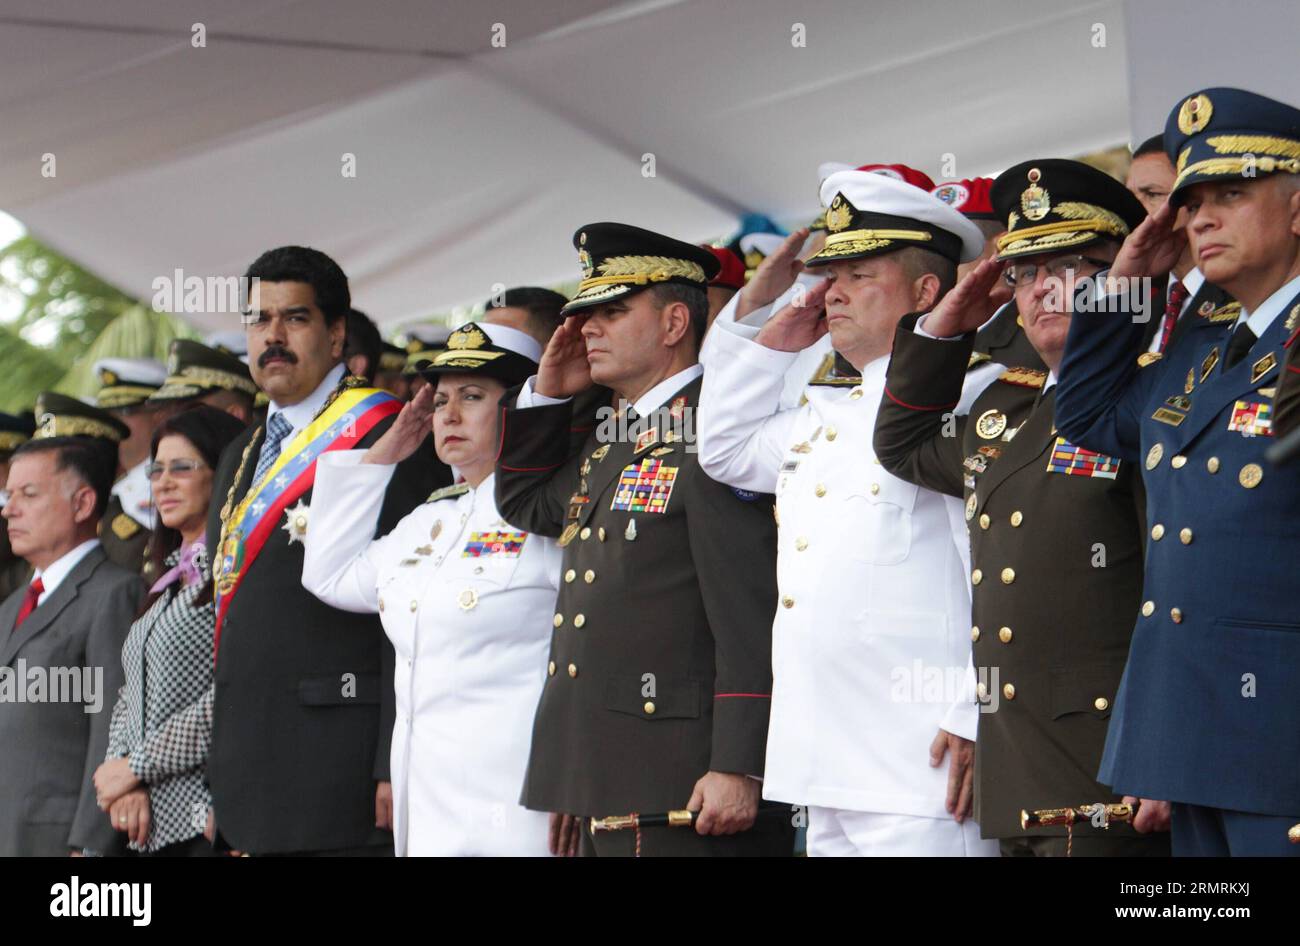 (140725) -- ZULIA, July 25, 2014 (Xinhua) -- Venezuela s President Nicolas Maduro (3rd L) attends the parade to commemorate the 191st anniversary of the Naval Battle of Maracaibo Lake and the Army Day in Maracaibo, Zulia State, July 24, 2014. (Xinhua/AVN) (rt) VENEZUELA-ZULIA-PARADE PUBLICATIONxNOTxINxCHN   July 25 2014 XINHUA Venezuela S President Nicolas Maduro 3rd l Attends The Parade to commemorate The  Anniversary of The Naval Battle of Maracaibo Lake and The Army Day in Maracaibo  State July 24 2014 XINHUA  RT Venezuela  Parade PUBLICATIONxNOTxINxCHN Stock Photo